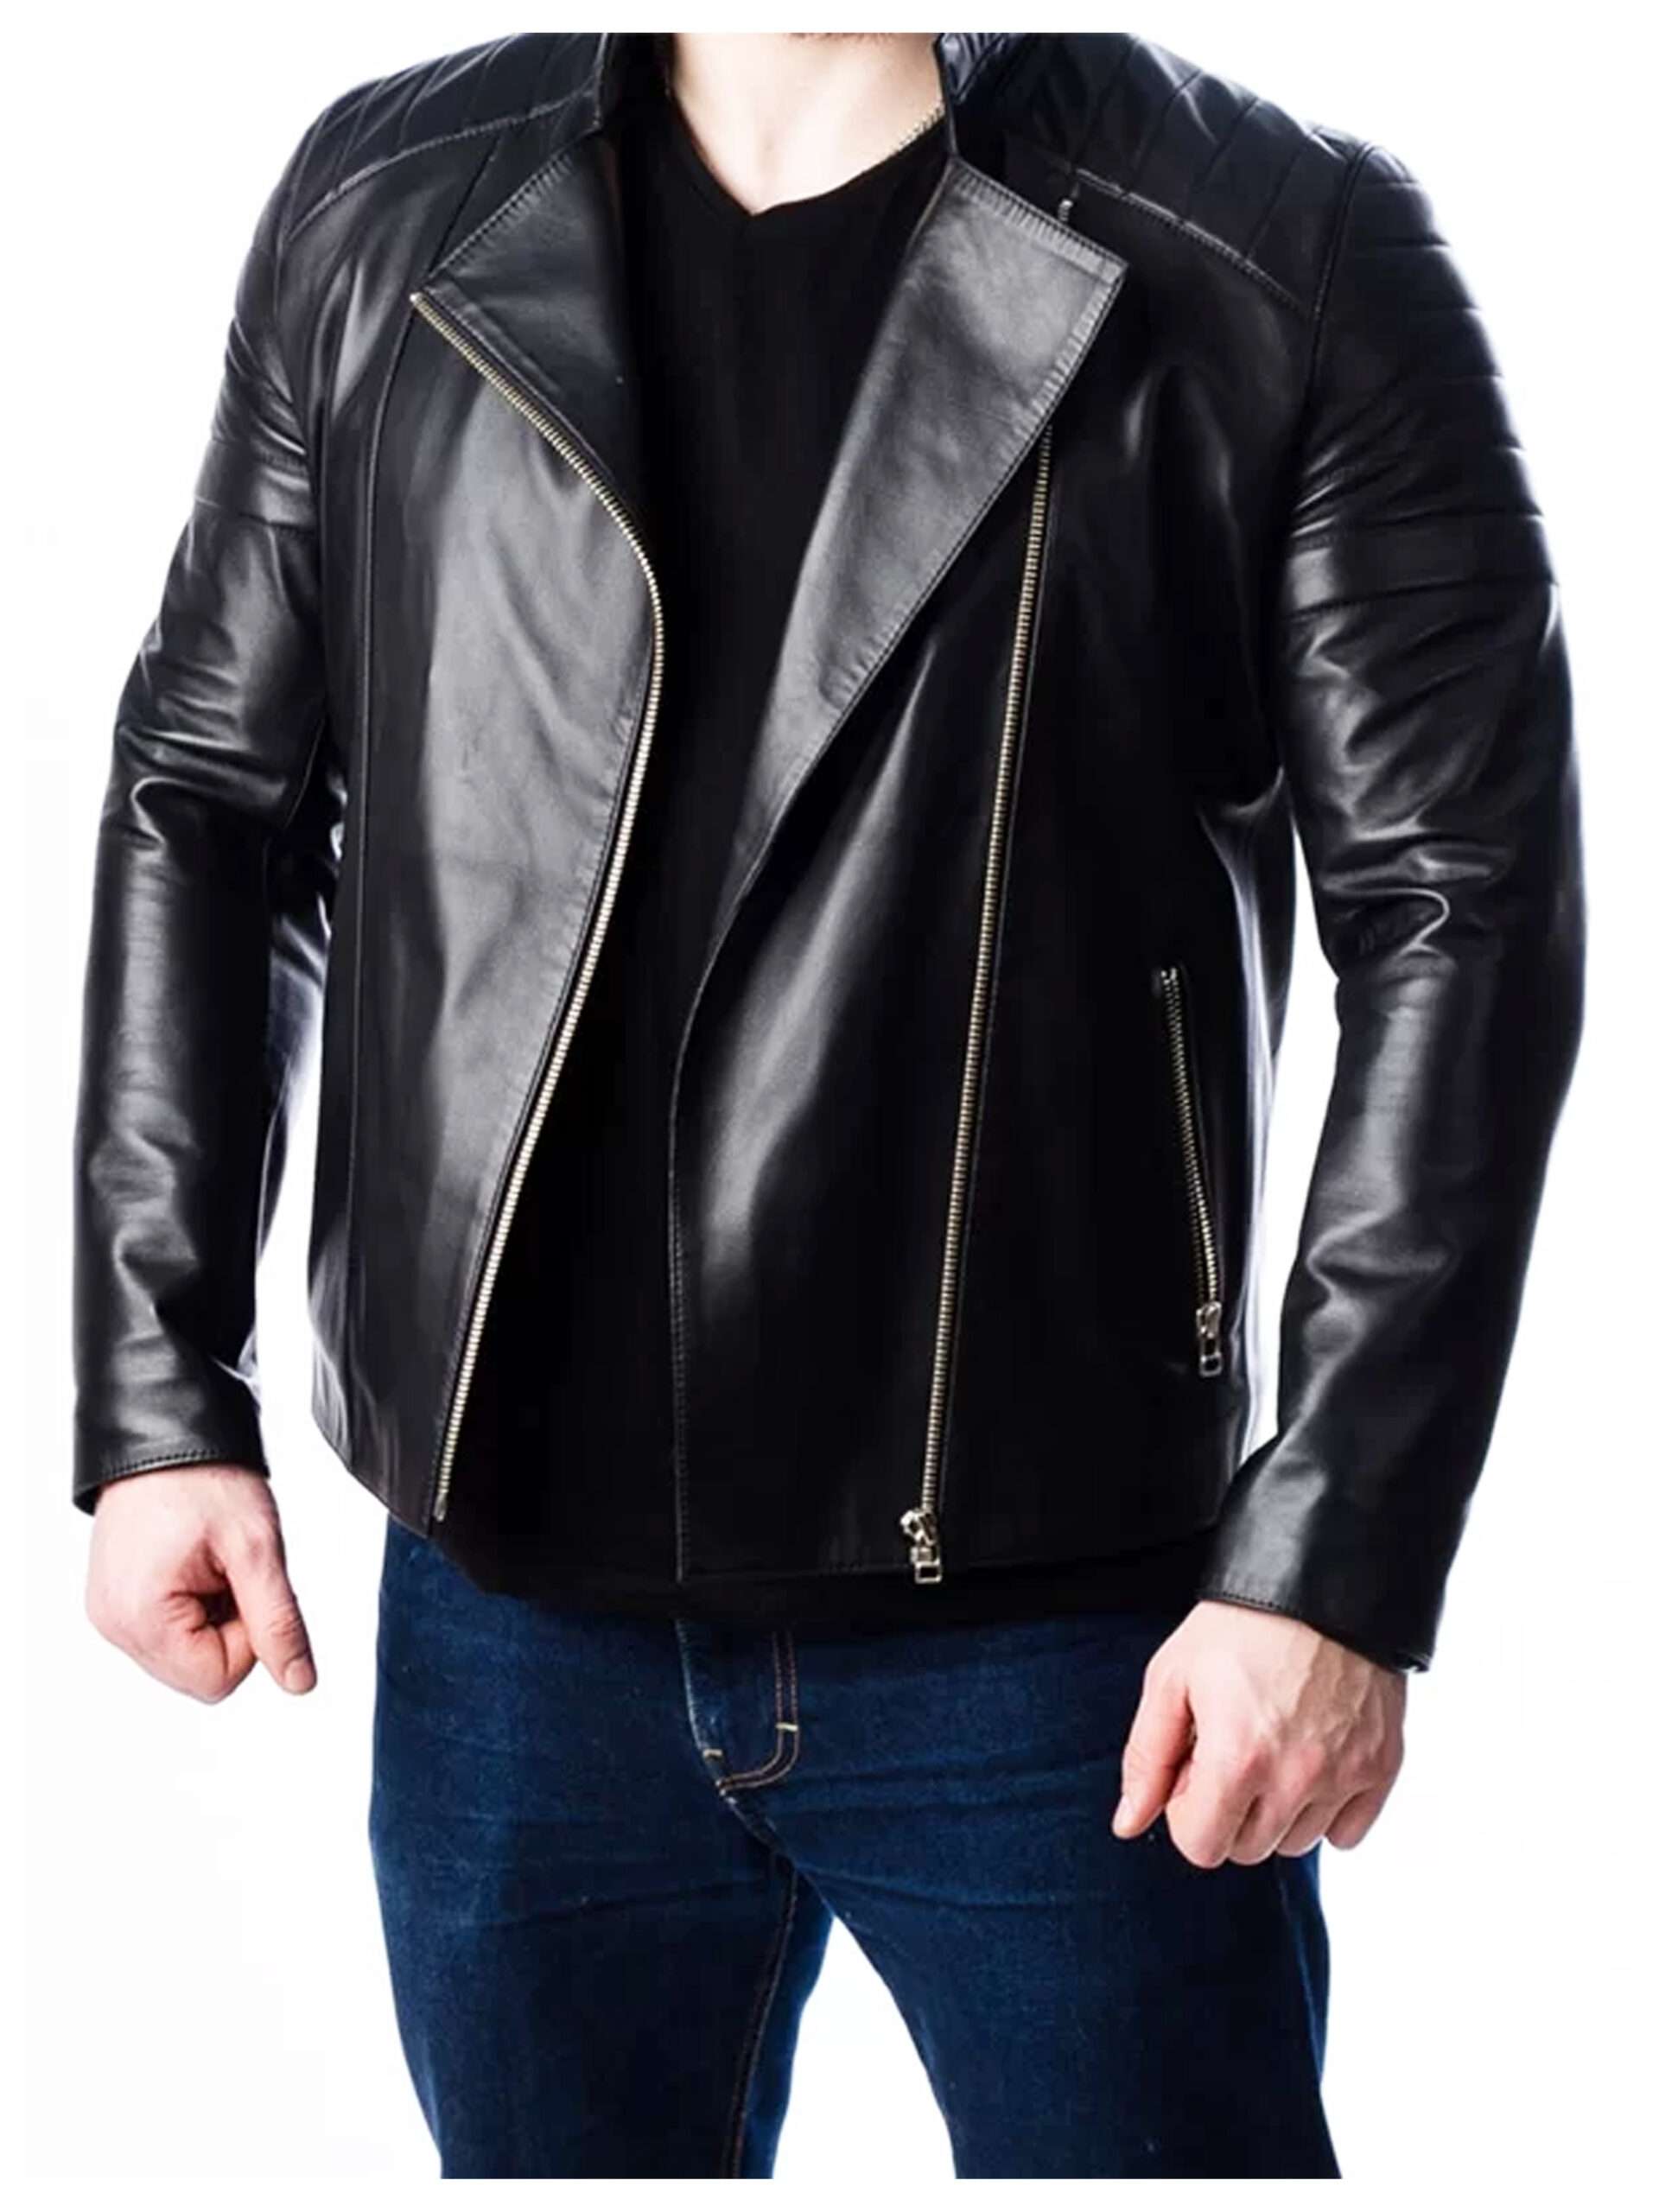 Men's Black Quilted Motorcycle Leather Jacket